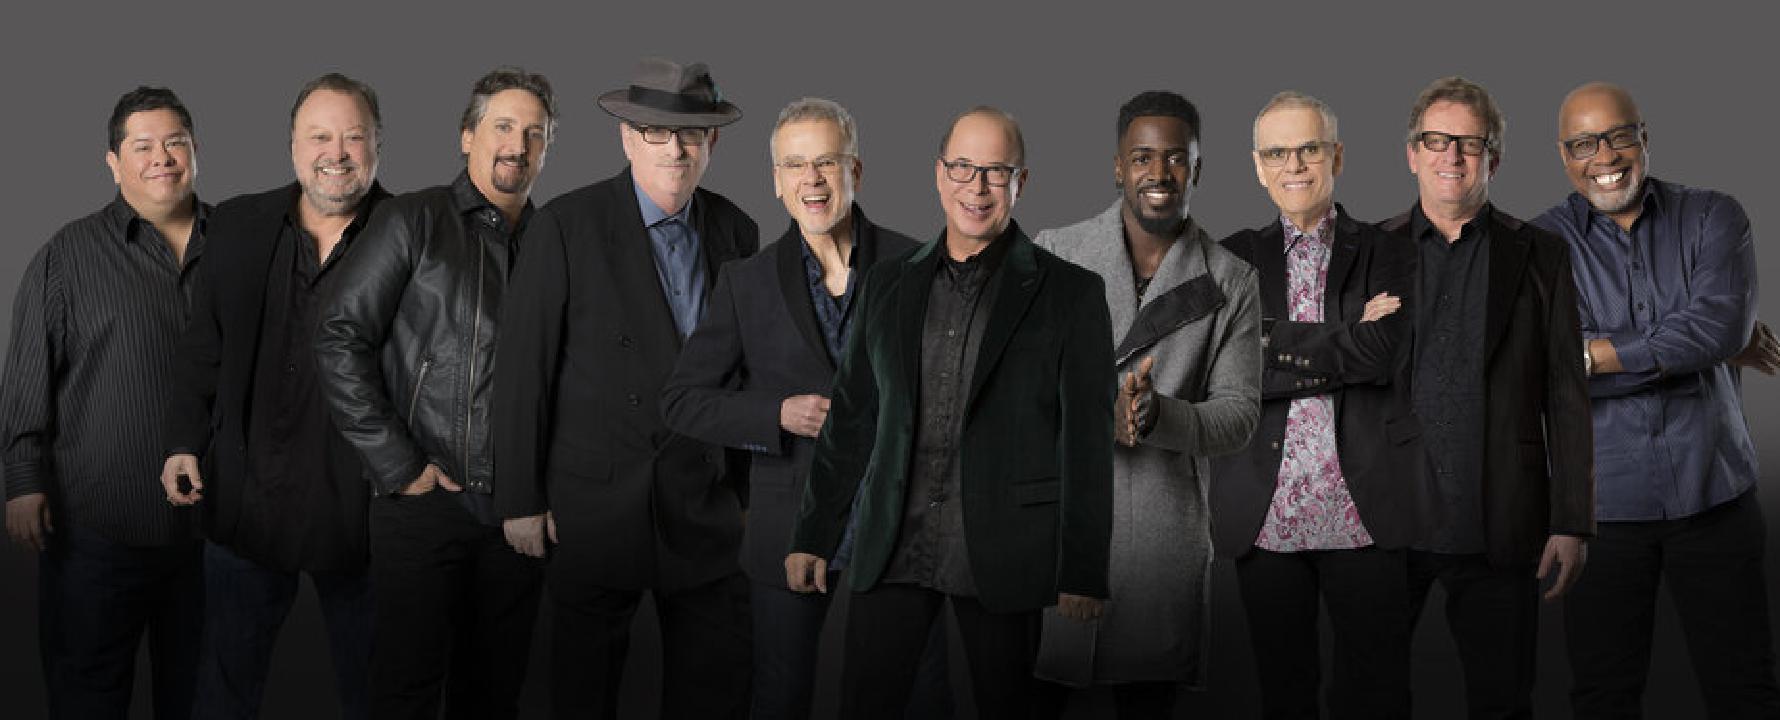 Promotional photograph of Tower of Power.